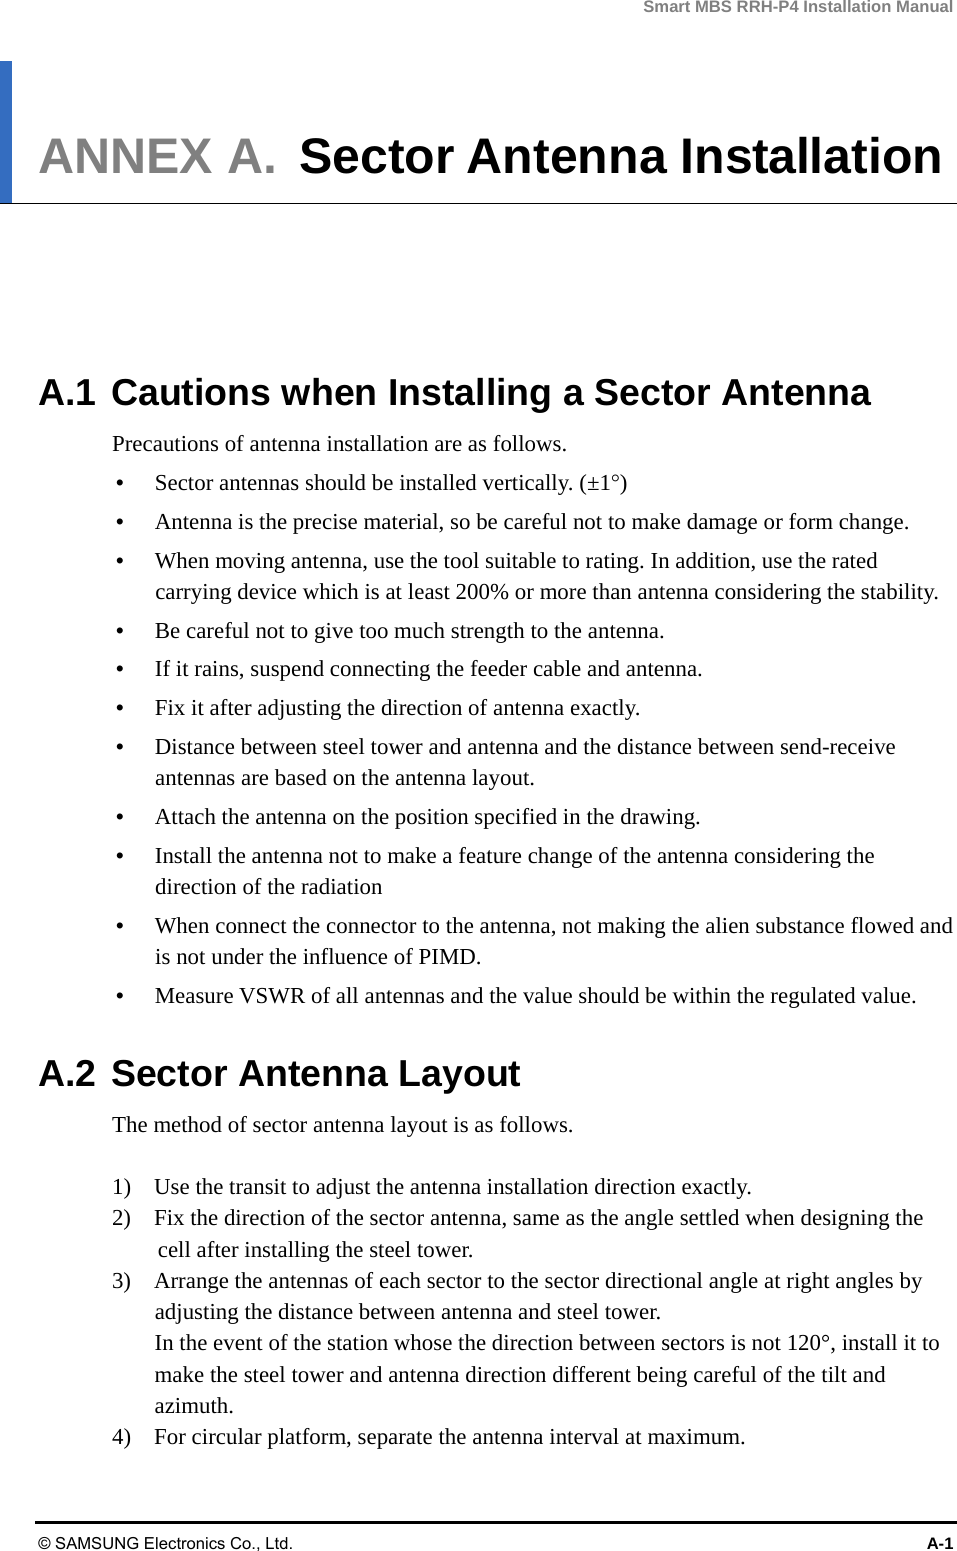 Smart MBS RRH-P4 Installation Manual © SAMSUNG Electronics Co., Ltd.  A-1 ANNEX A.  Sector Antenna Installation      A.1 Cautions when Installing a Sector Antenna Precautions of antenna installation are as follows.  Sector antennas should be installed vertically. (±1)  Antenna is the precise material, so be careful not to make damage or form change.    When moving antenna, use the tool suitable to rating. In addition, use the rated carrying device which is at least 200% or more than antenna considering the stability.  Be careful not to give too much strength to the antenna.    If it rains, suspend connecting the feeder cable and antenna.    Fix it after adjusting the direction of antenna exactly.    Distance between steel tower and antenna and the distance between send-receive antennas are based on the antenna layout.  Attach the antenna on the position specified in the drawing.    Install the antenna not to make a feature change of the antenna considering the direction of the radiation    When connect the connector to the antenna, not making the alien substance flowed and is not under the influence of PIMD.    Measure VSWR of all antennas and the value should be within the regulated value.  A.2 Sector Antenna Layout The method of sector antenna layout is as follows.  1)    Use the transit to adjust the antenna installation direction exactly. 2)    Fix the direction of the sector antenna, same as the angle settled when designing the cell after installing the steel tower. 3)    Arrange the antennas of each sector to the sector directional angle at right angles by adjusting the distance between antenna and steel tower. In the event of the station whose the direction between sectors is not 120°, install it to make the steel tower and antenna direction different being careful of the tilt and azimuth. 4)    For circular platform, separate the antenna interval at maximum.  